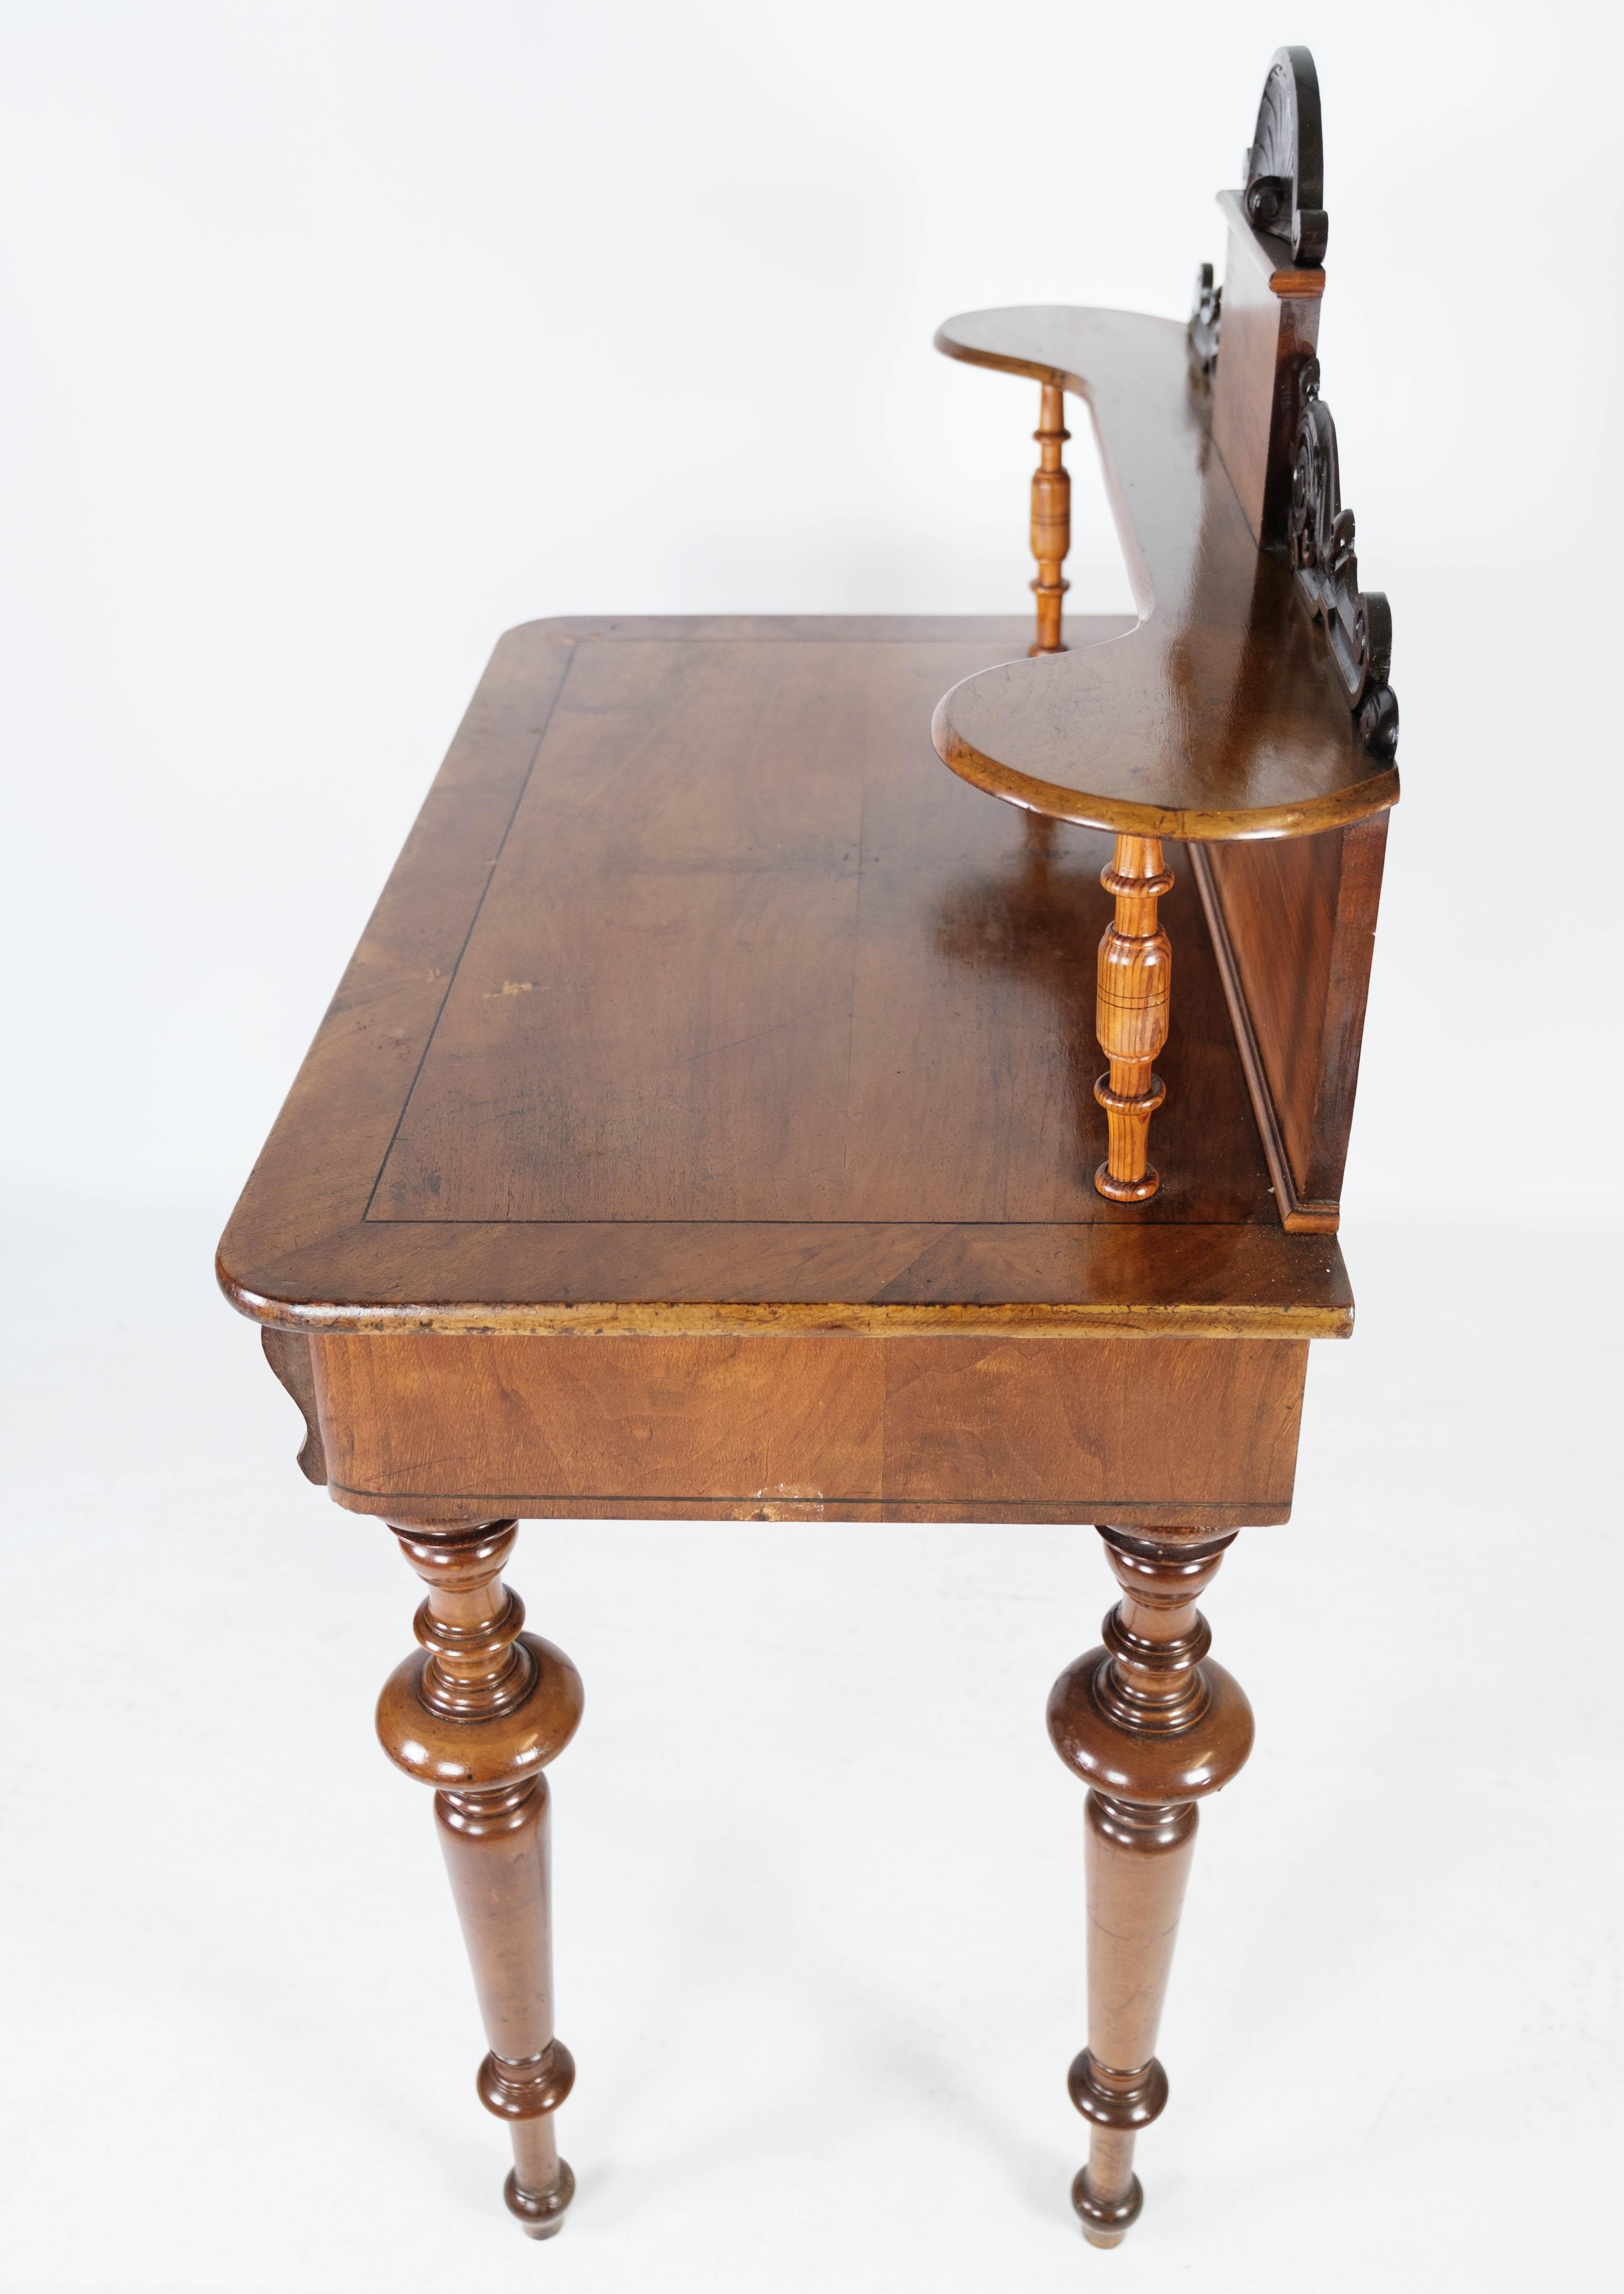 Danish Dressing Table/Desk of Walnut and Decorated with Carvings, 1880s